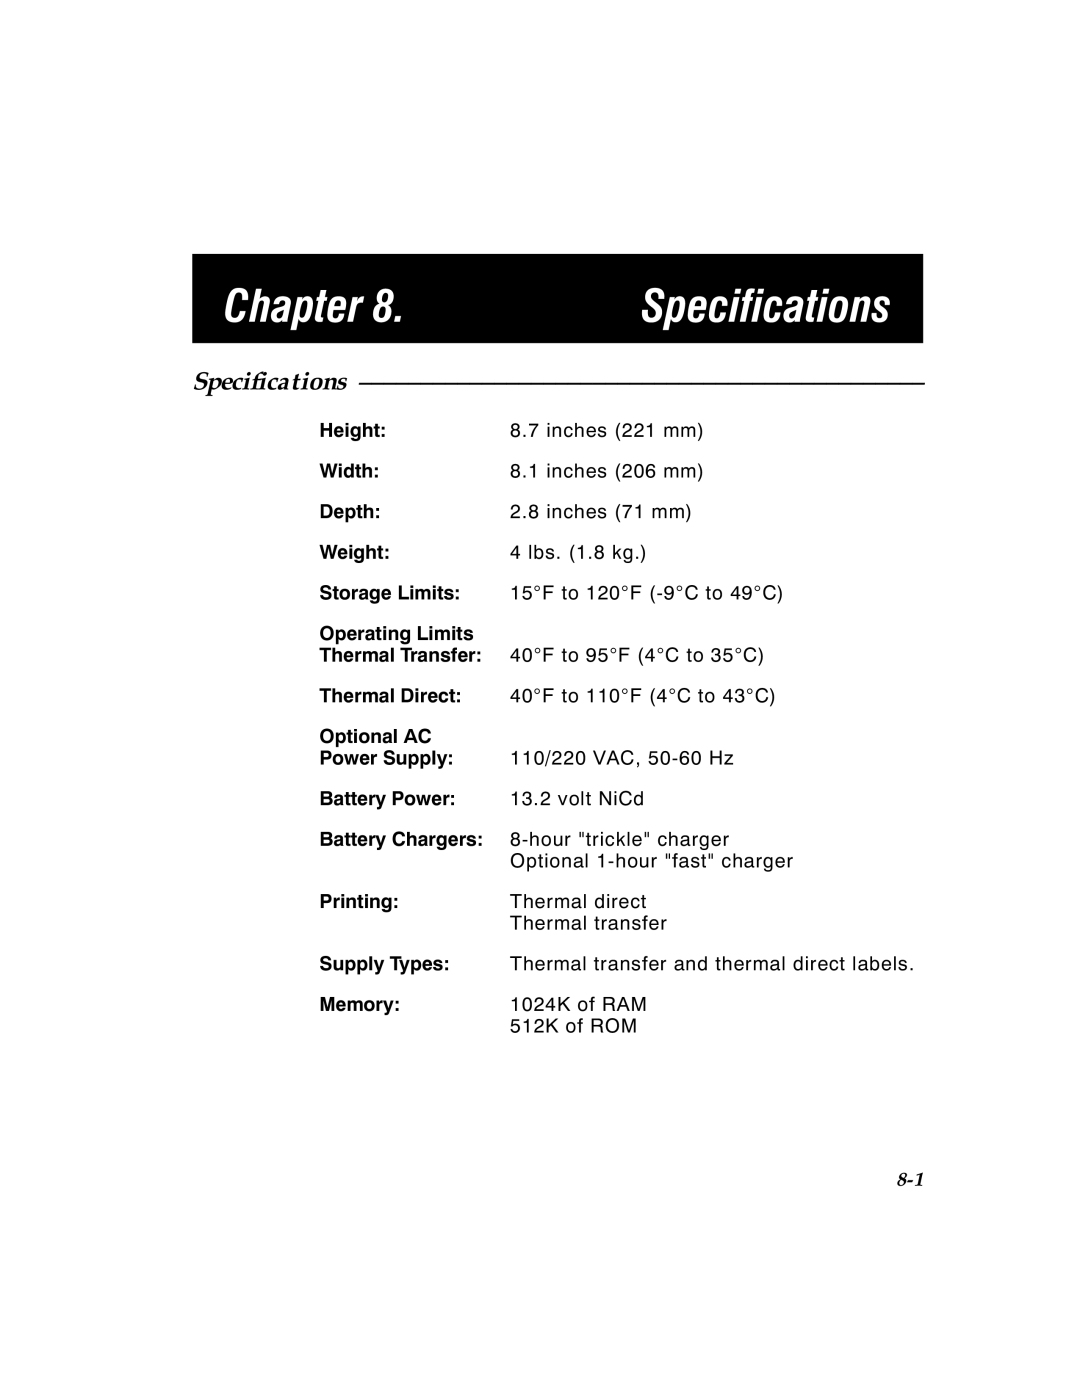 Paxar 4 manual Specifications, Chapter 